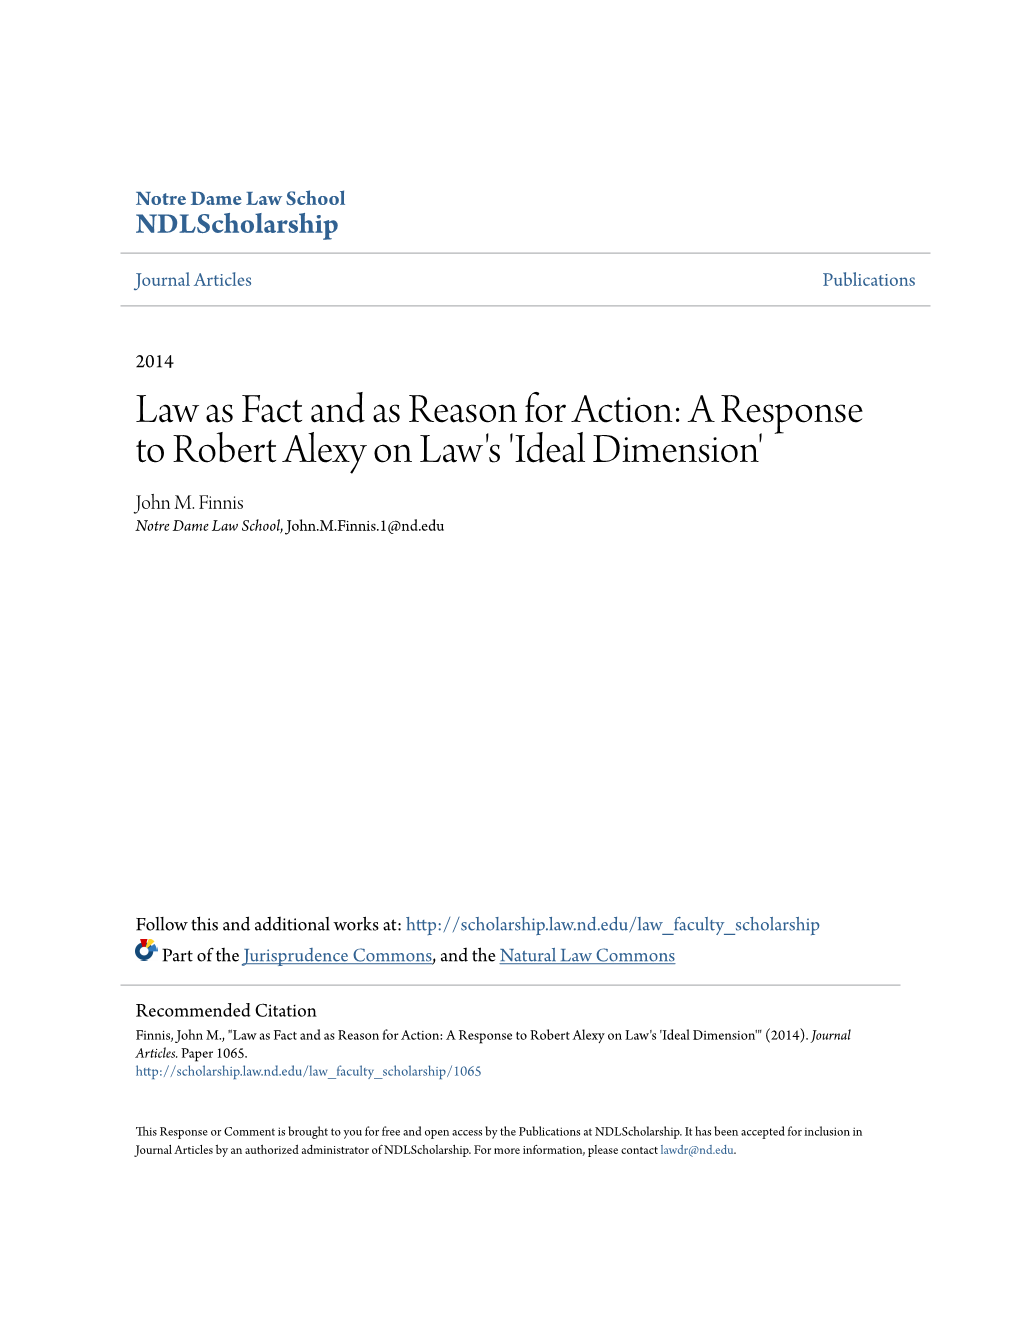 A Response to Robert Alexy on Law's 'Ideal Dimension' John M